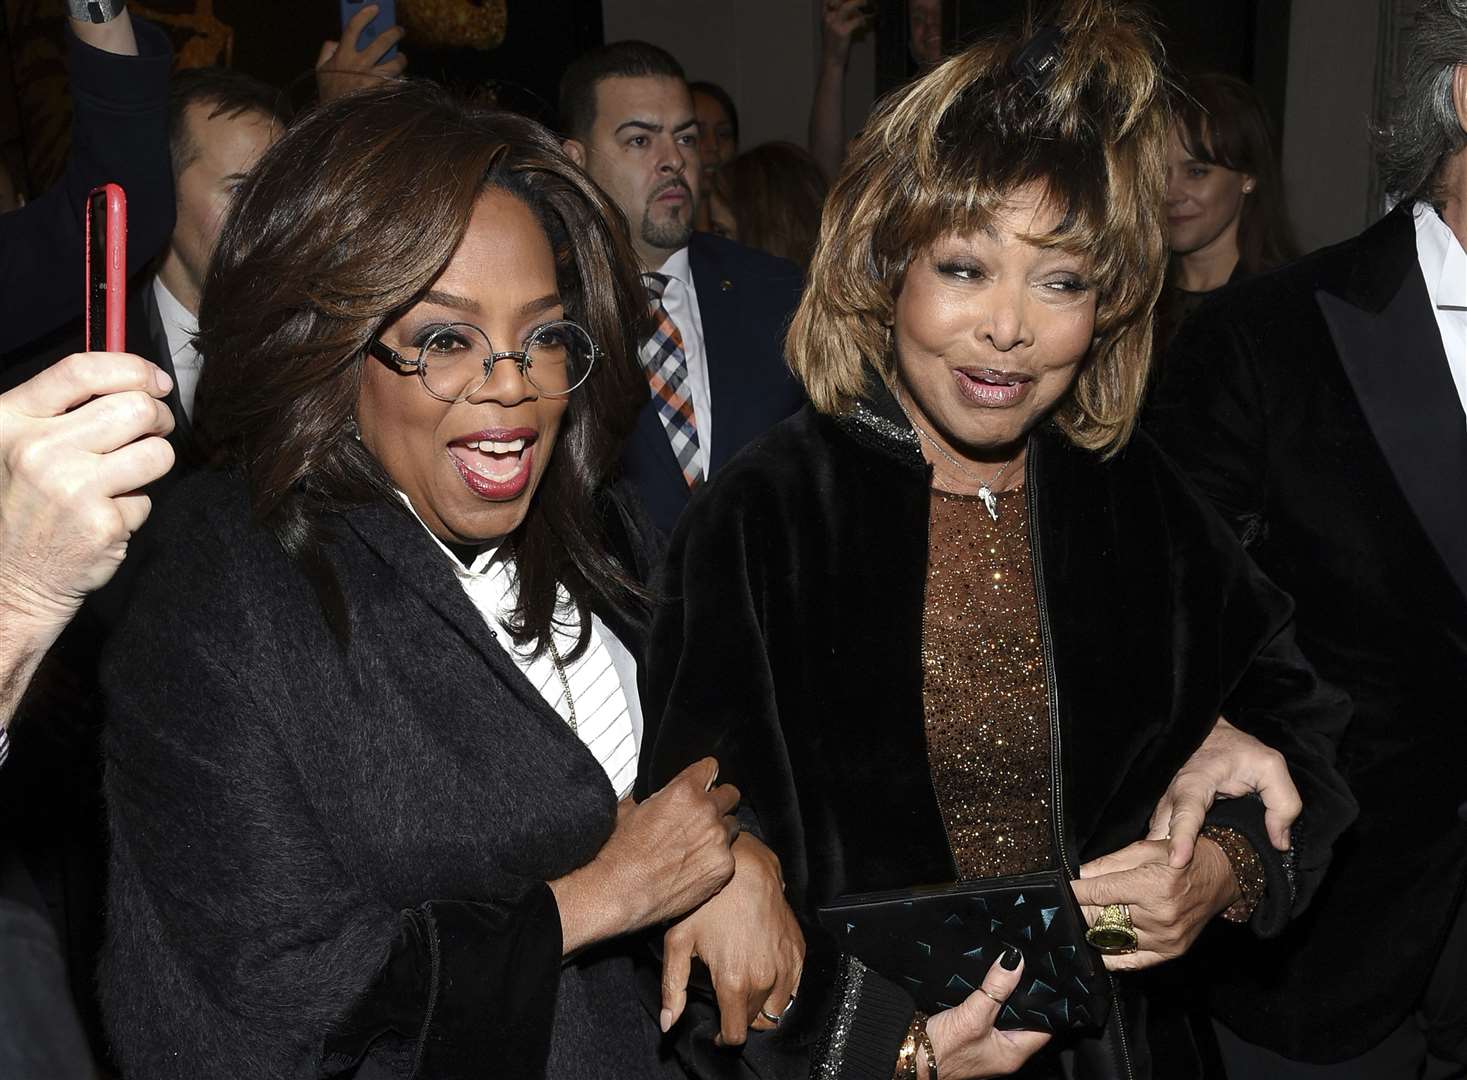 Oprah Winfrey and Tina Turner had been friends for decades (Evan Agostini/Invision/AP)